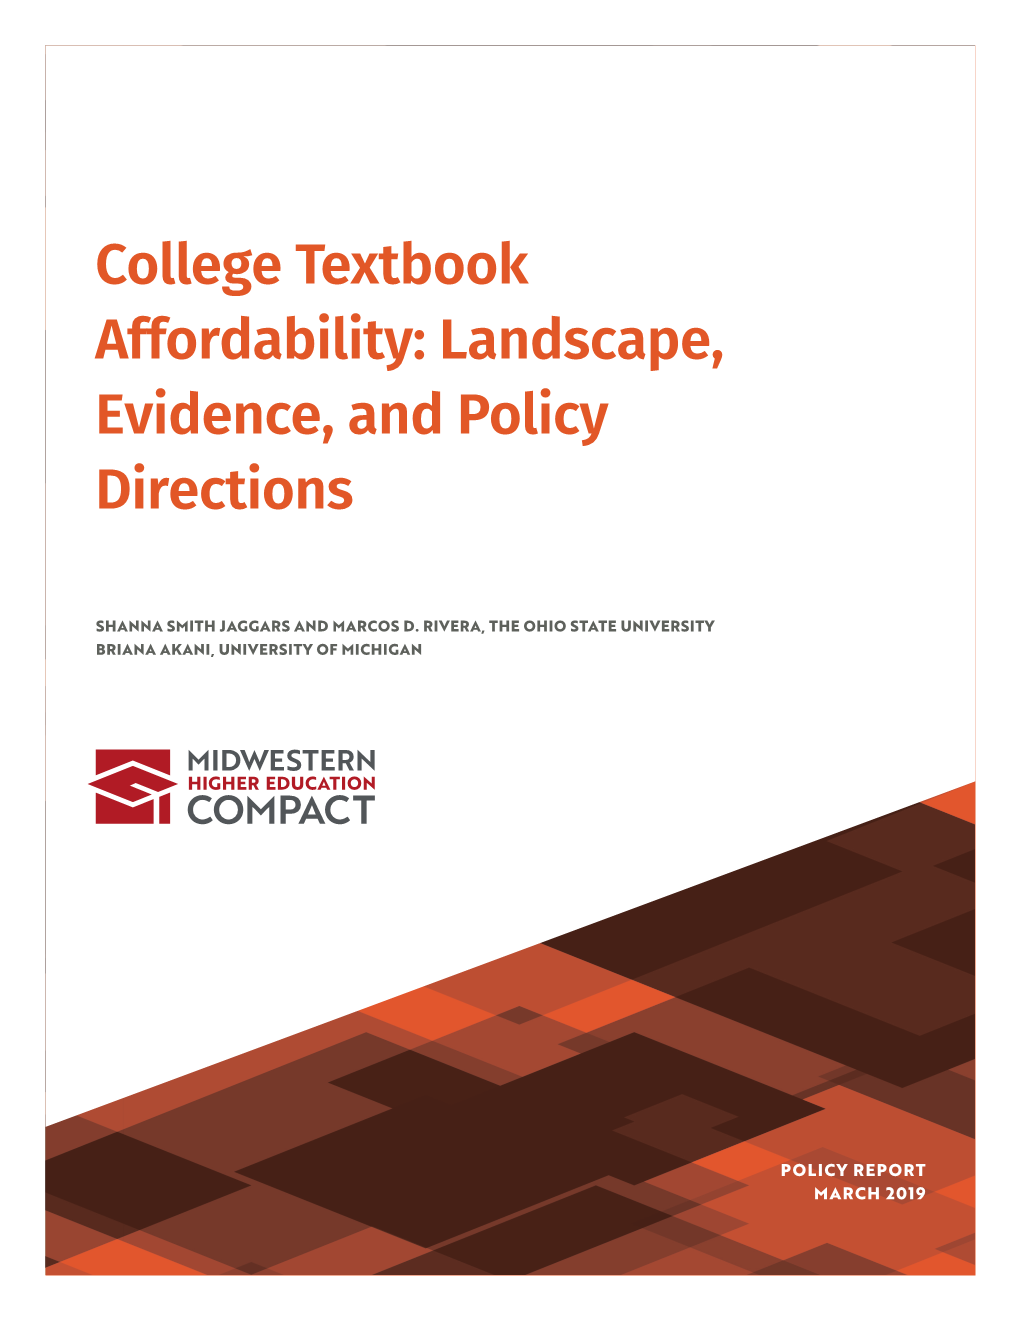 College Textbook Affordability: Landscape, Evidence, and Policy Directions